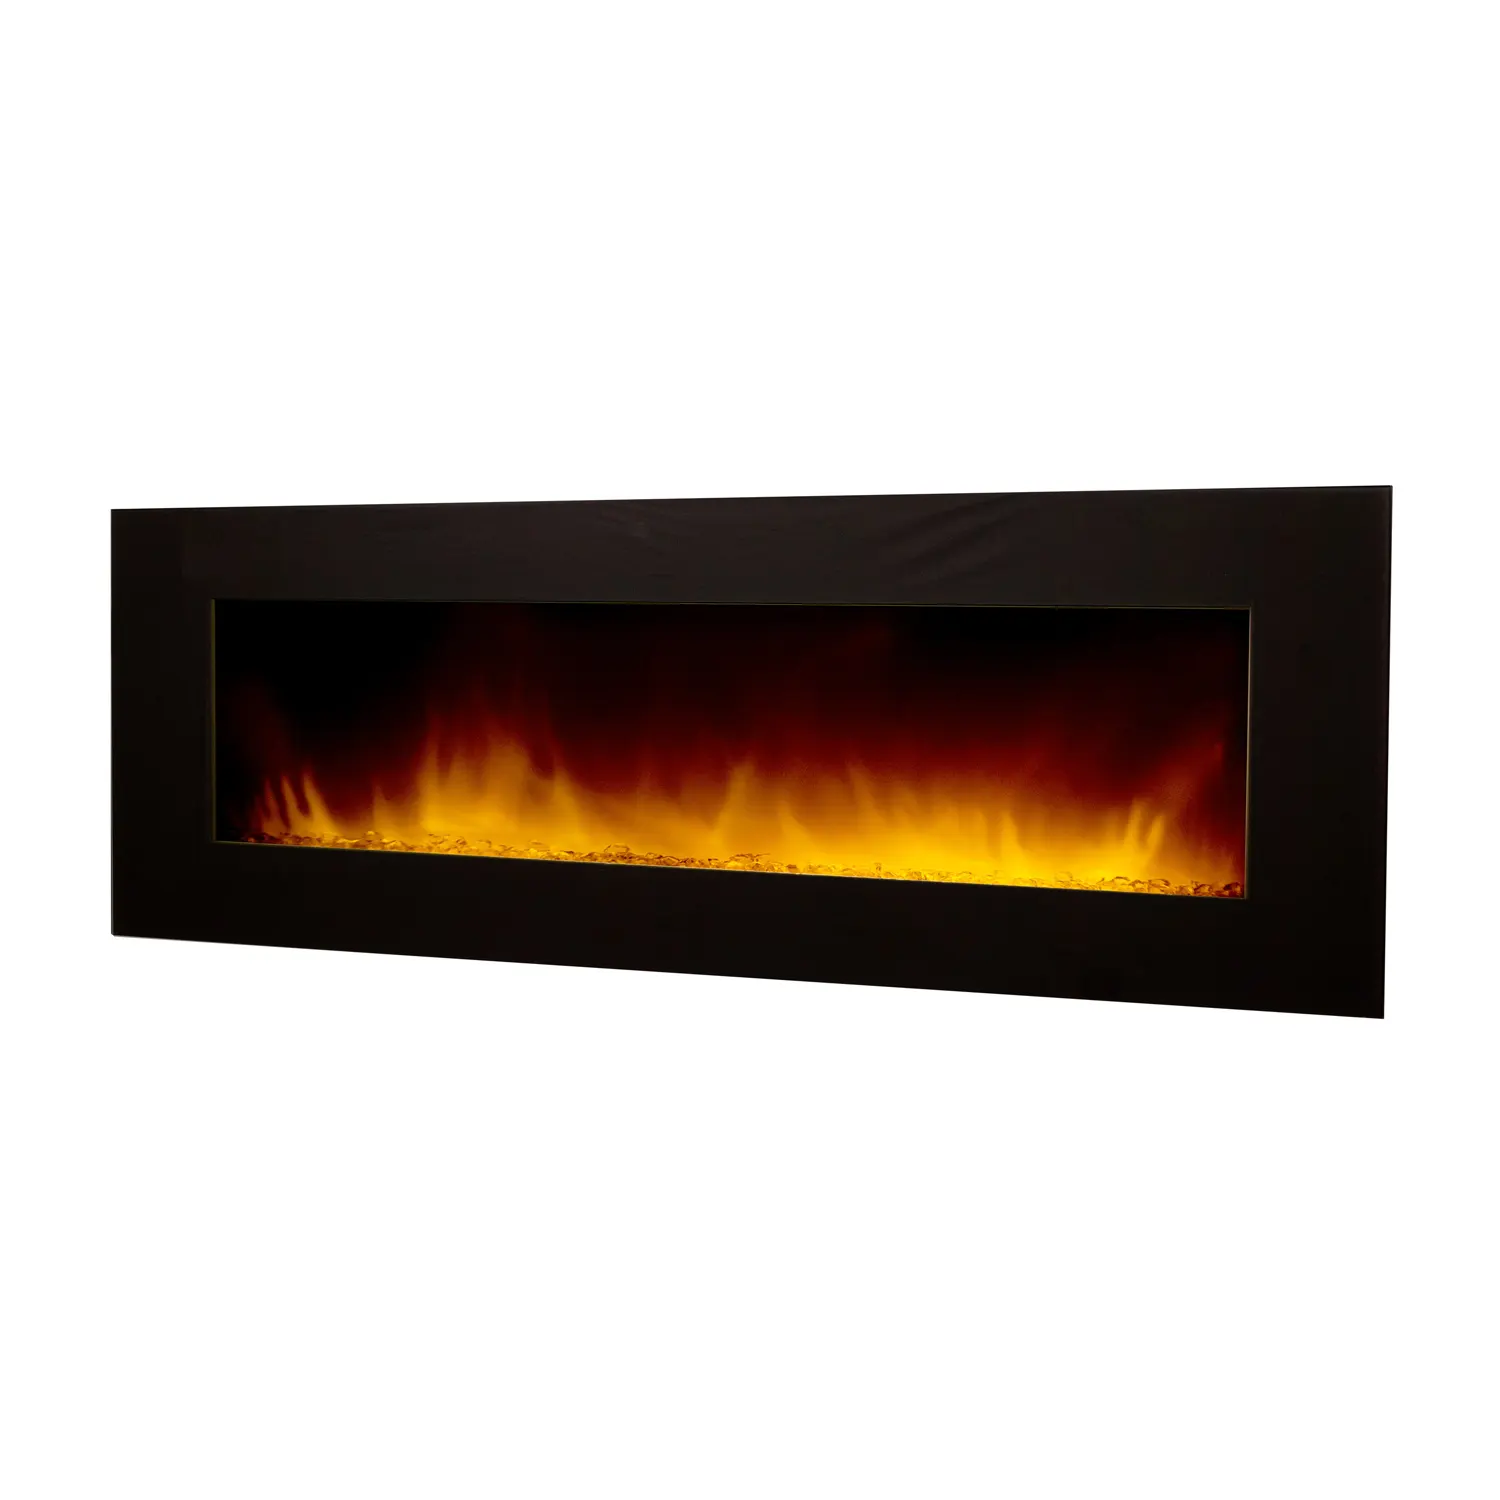 Electric fireplace Volcano 5XL